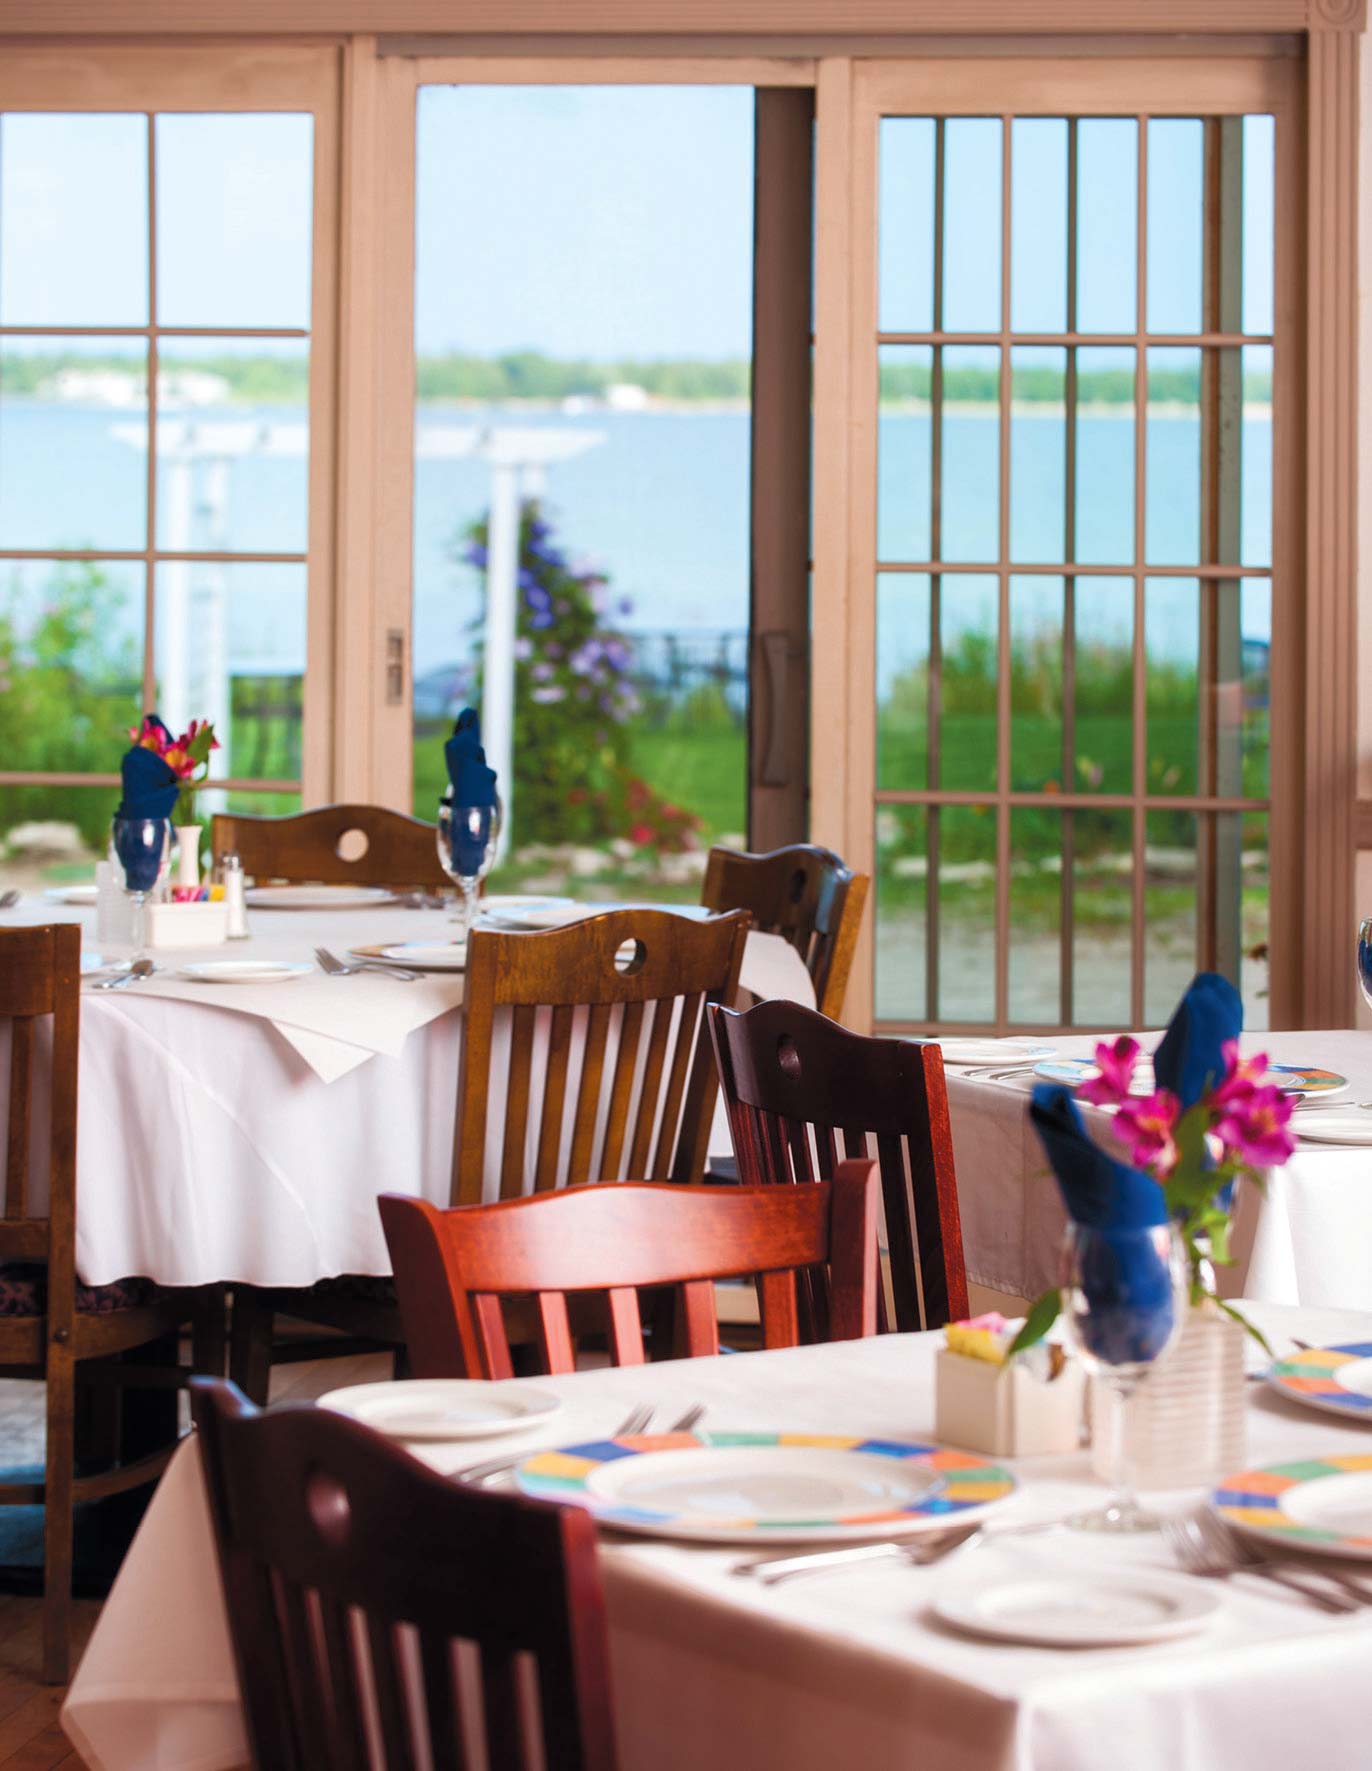 Harbor Fish Market & Grille offers a classic Baileys Harbor setting. Contributed photo